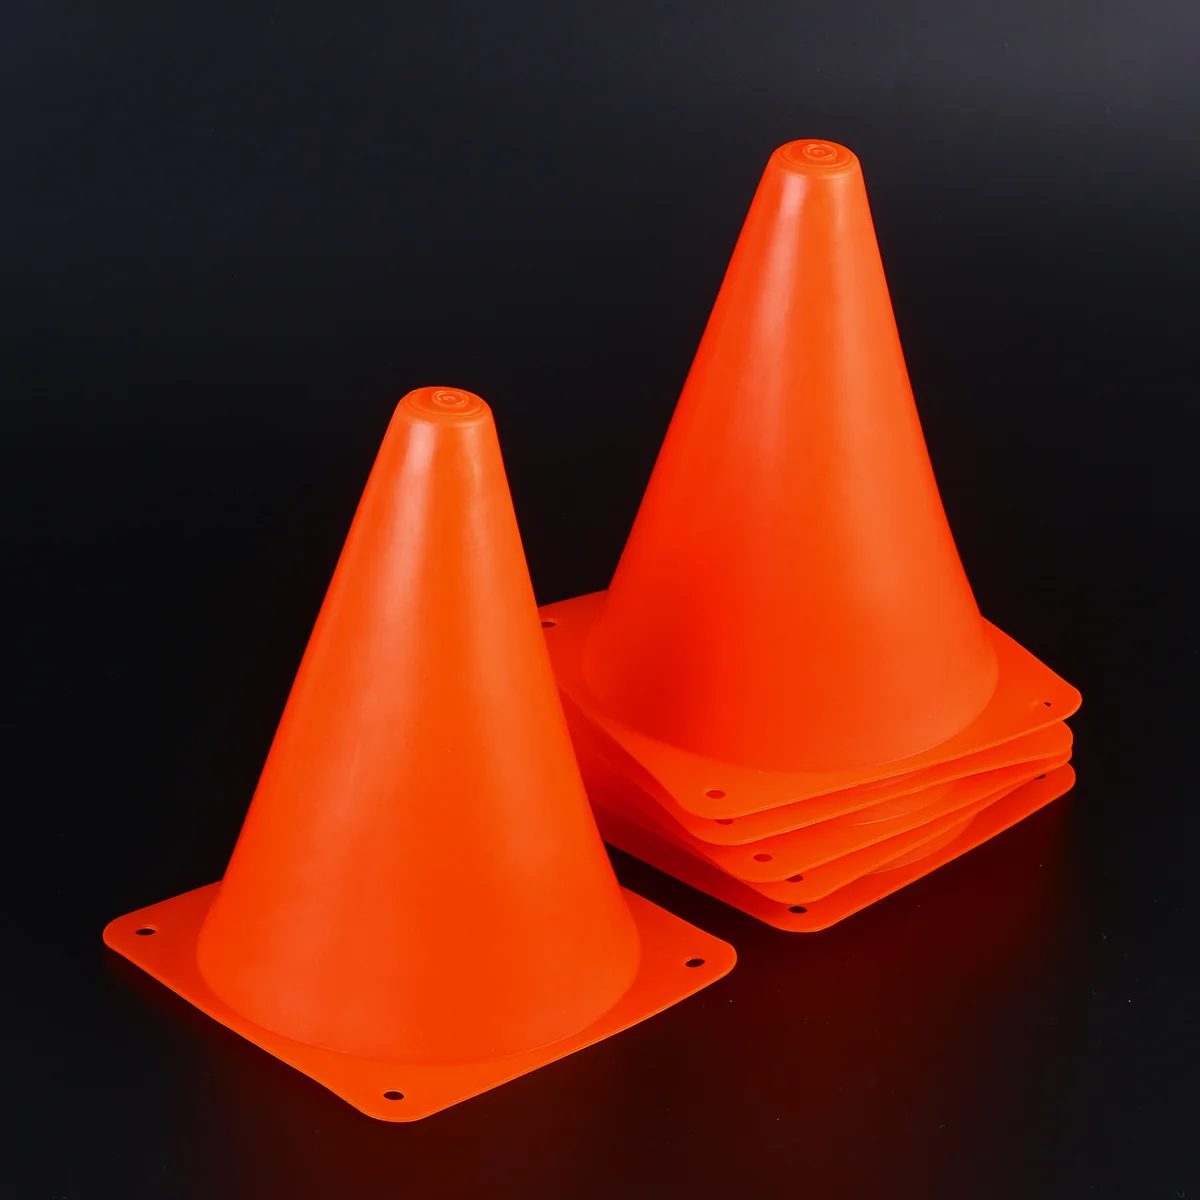 18cm Football Soccer Rugby Training Cones Outdoor Sports Obstacles Barriers for Kids Outdoor Gaming and Activity (Orange)